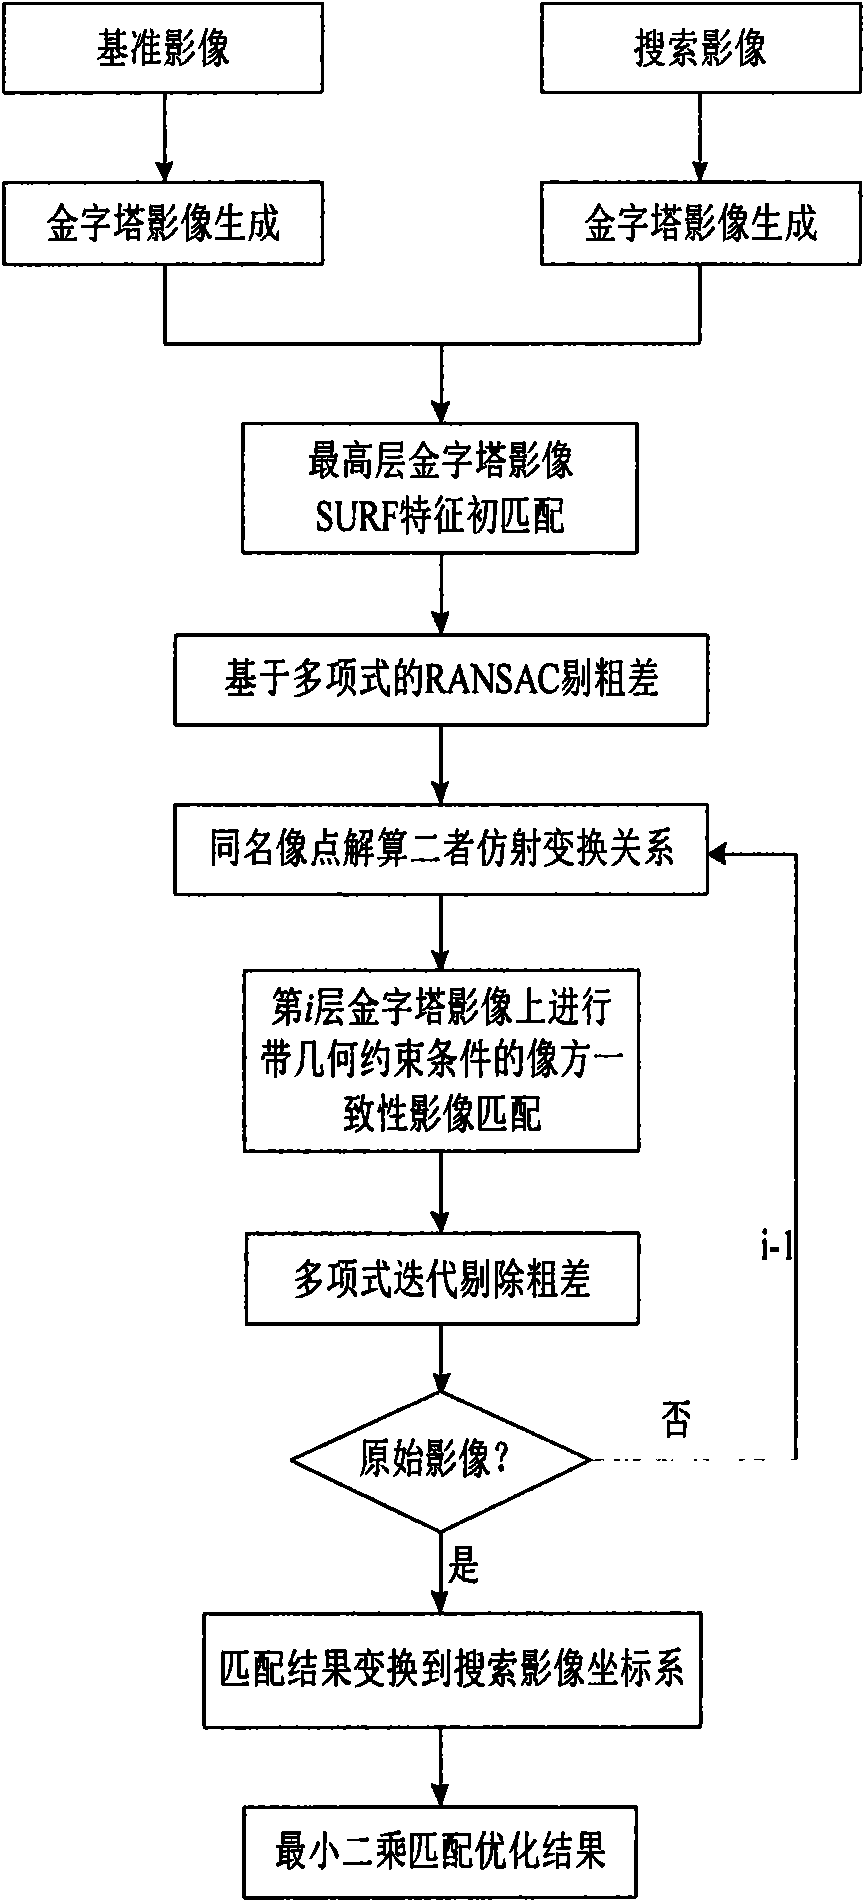 Low-altitude remote sensing image high-precision matching method with consistent image space